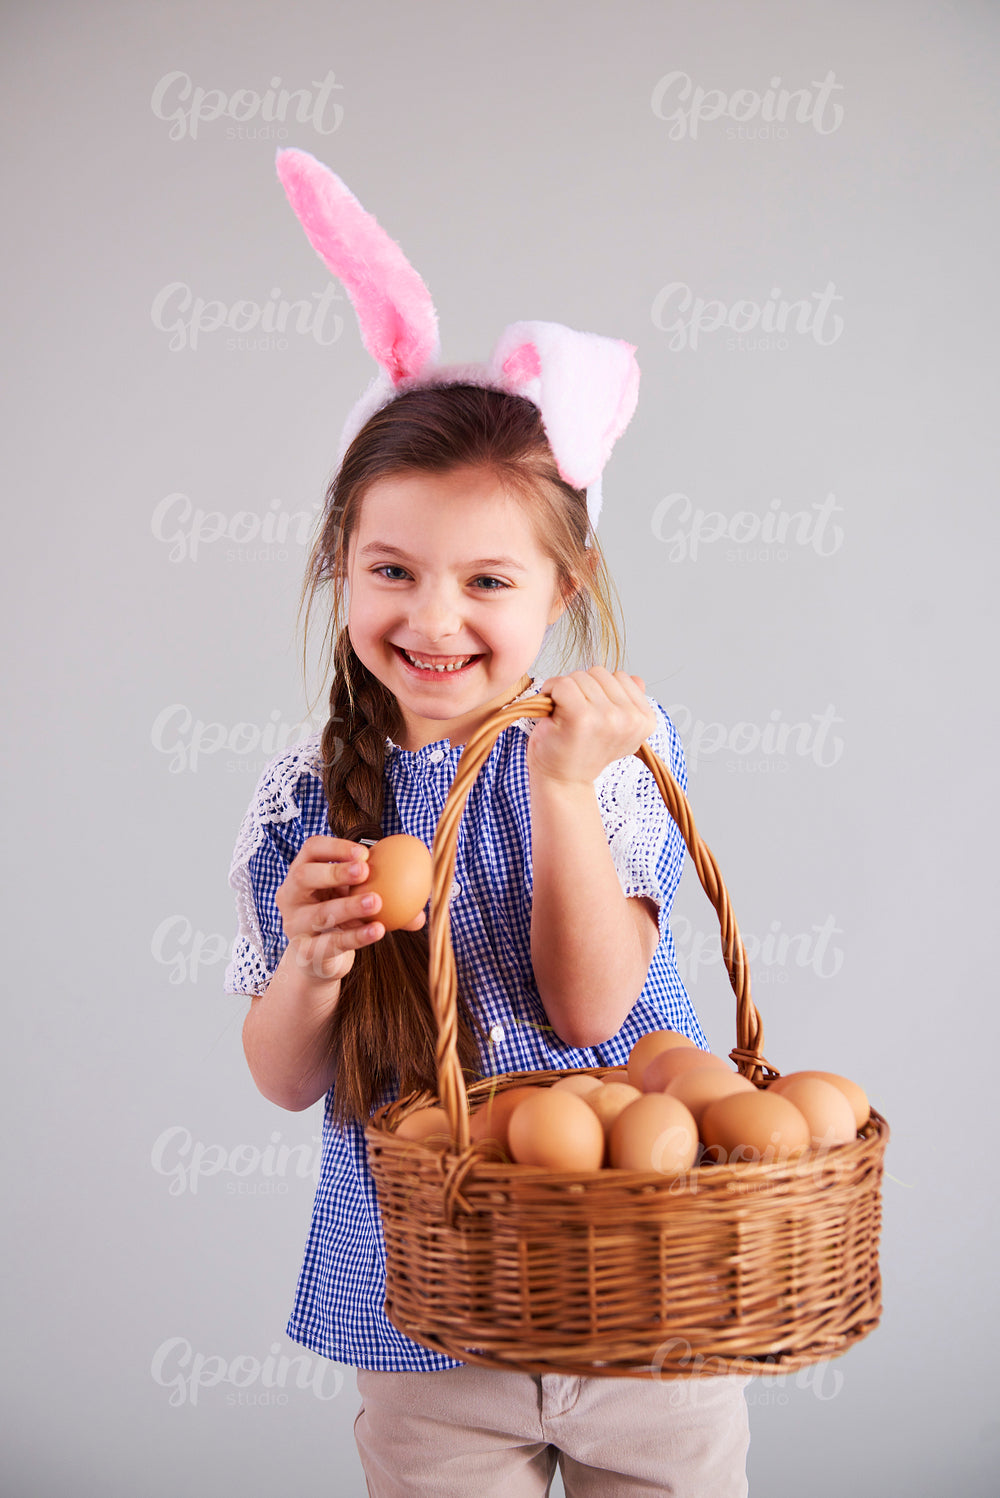 Smiling woman in rabbit costume holding a basket of eggs